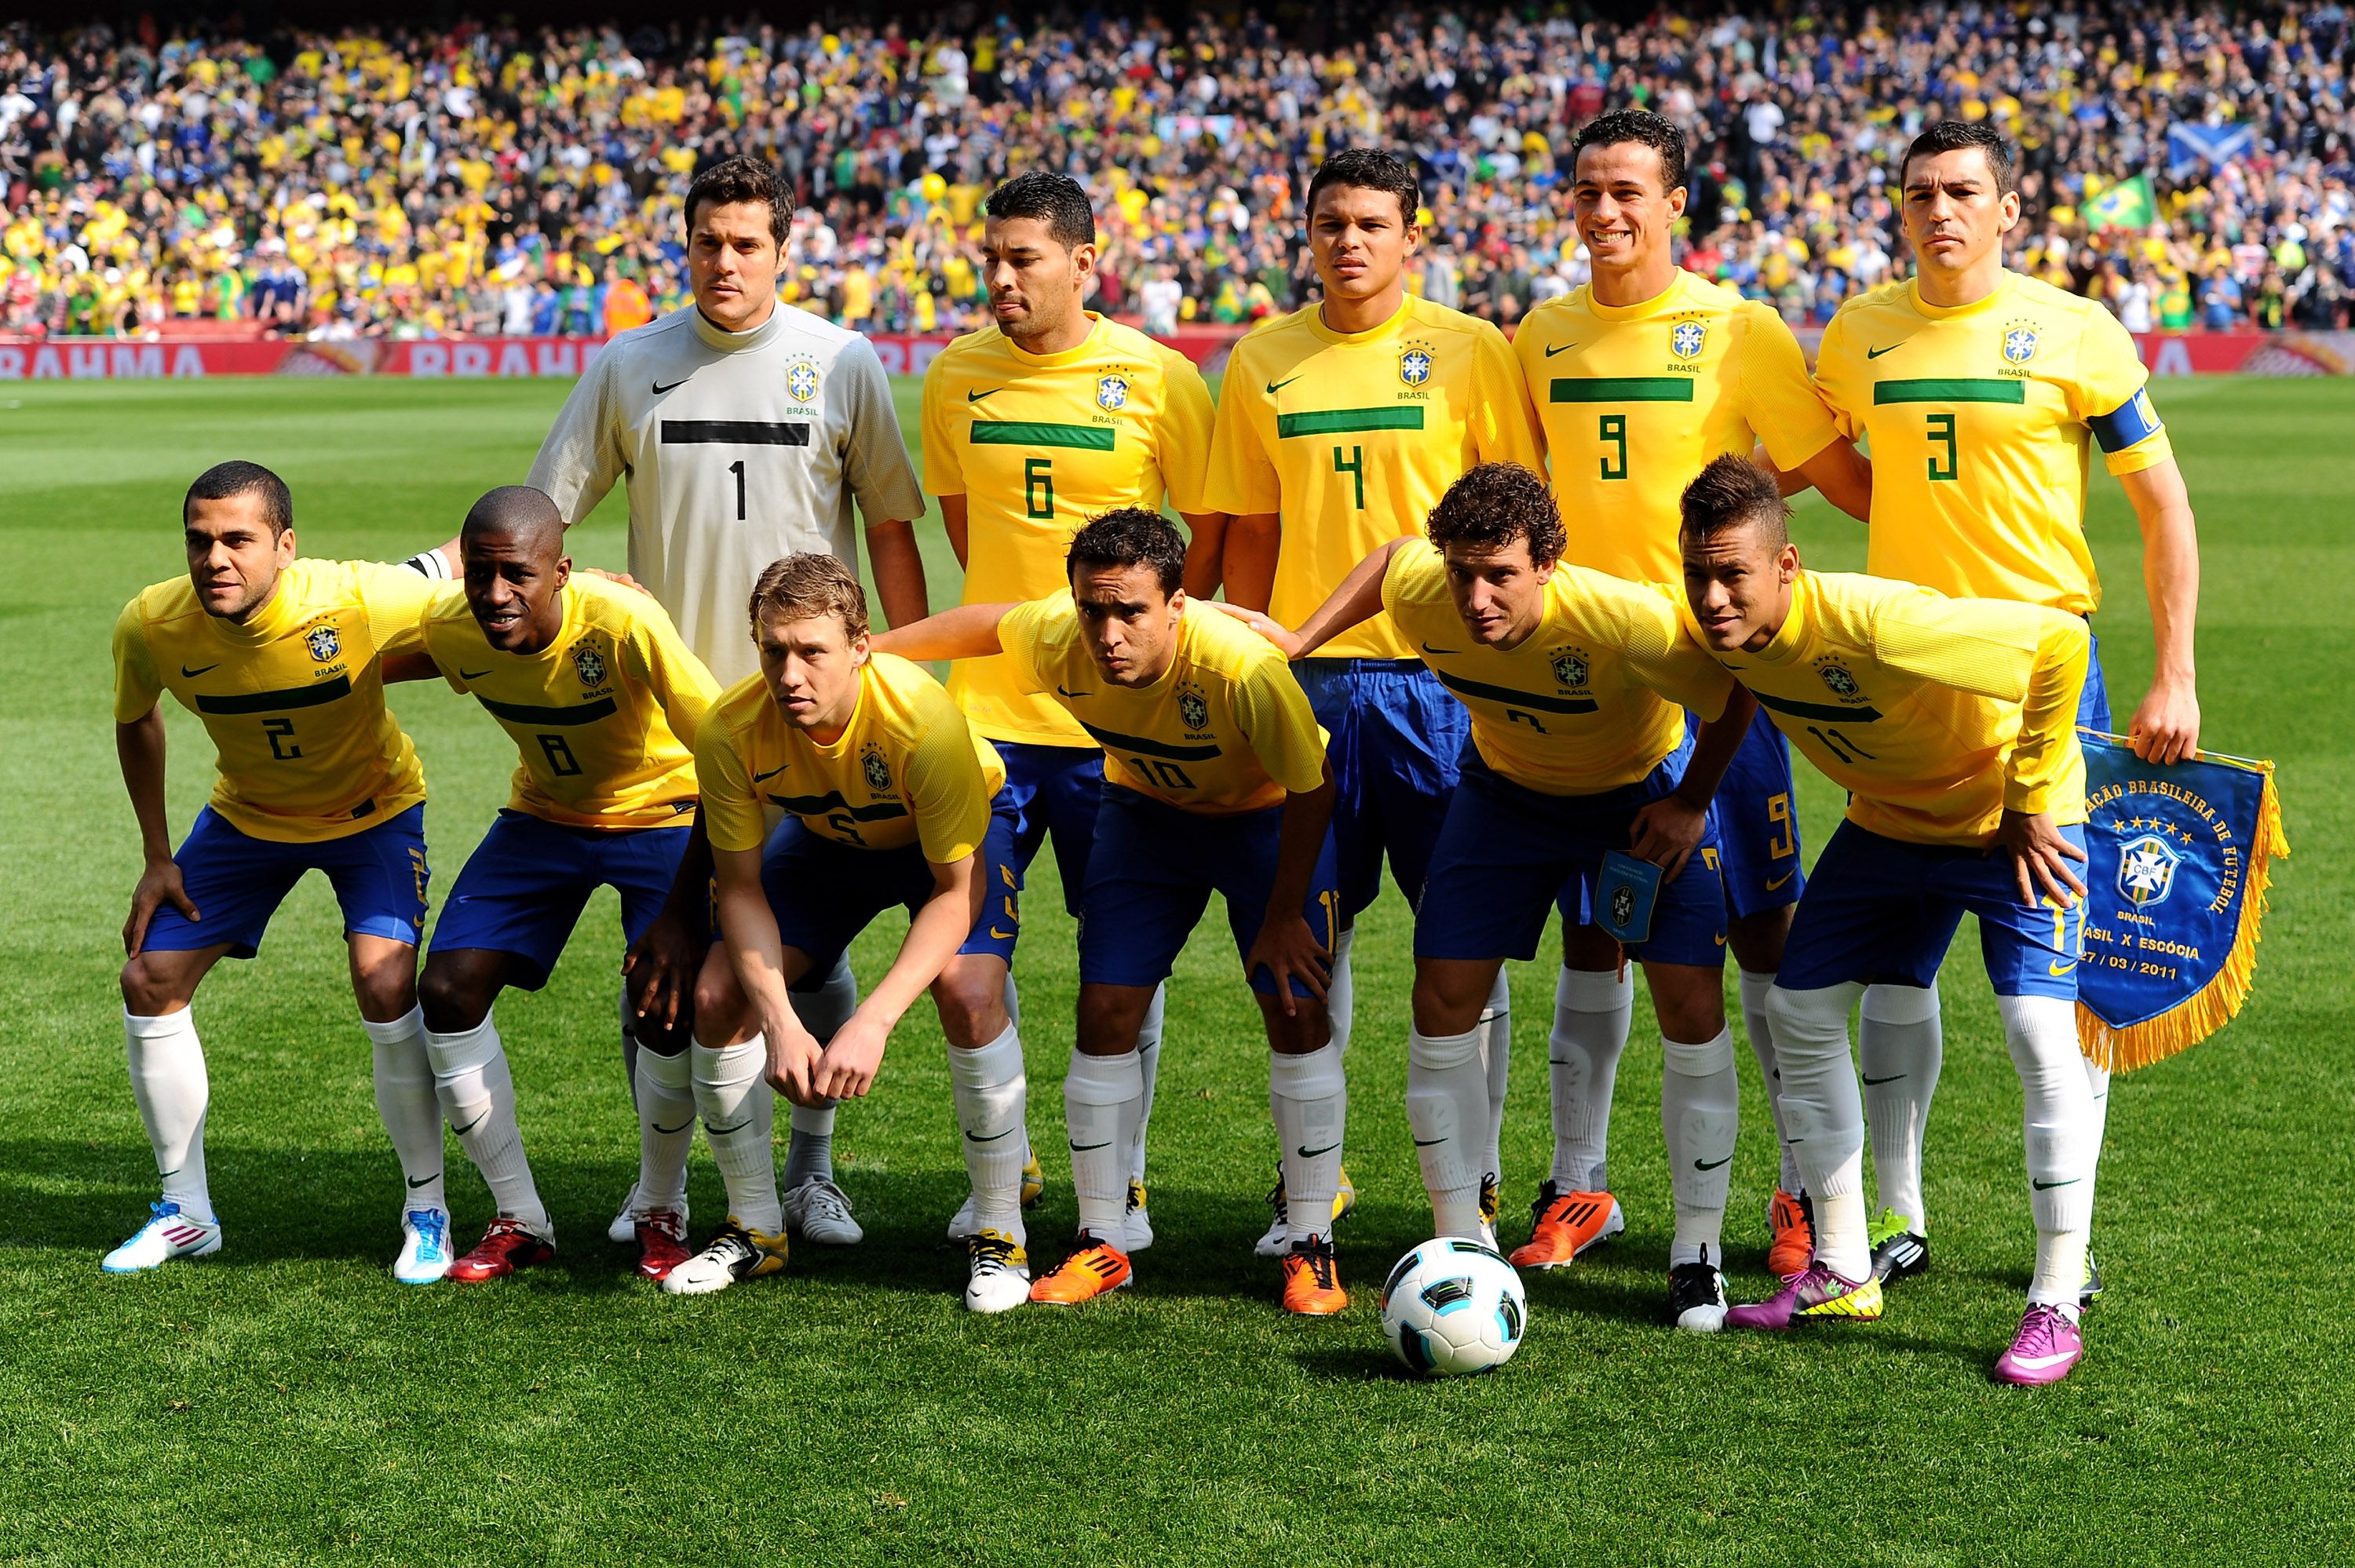 LONDON, ENGLAND - MARCH 27:  The Brazil team line up prior to the International friendly match between Brazil and Scotland at Emirates Stadium on March 27, 2011 in London, England.  (Photo by Mike Hewitt/Getty Images)